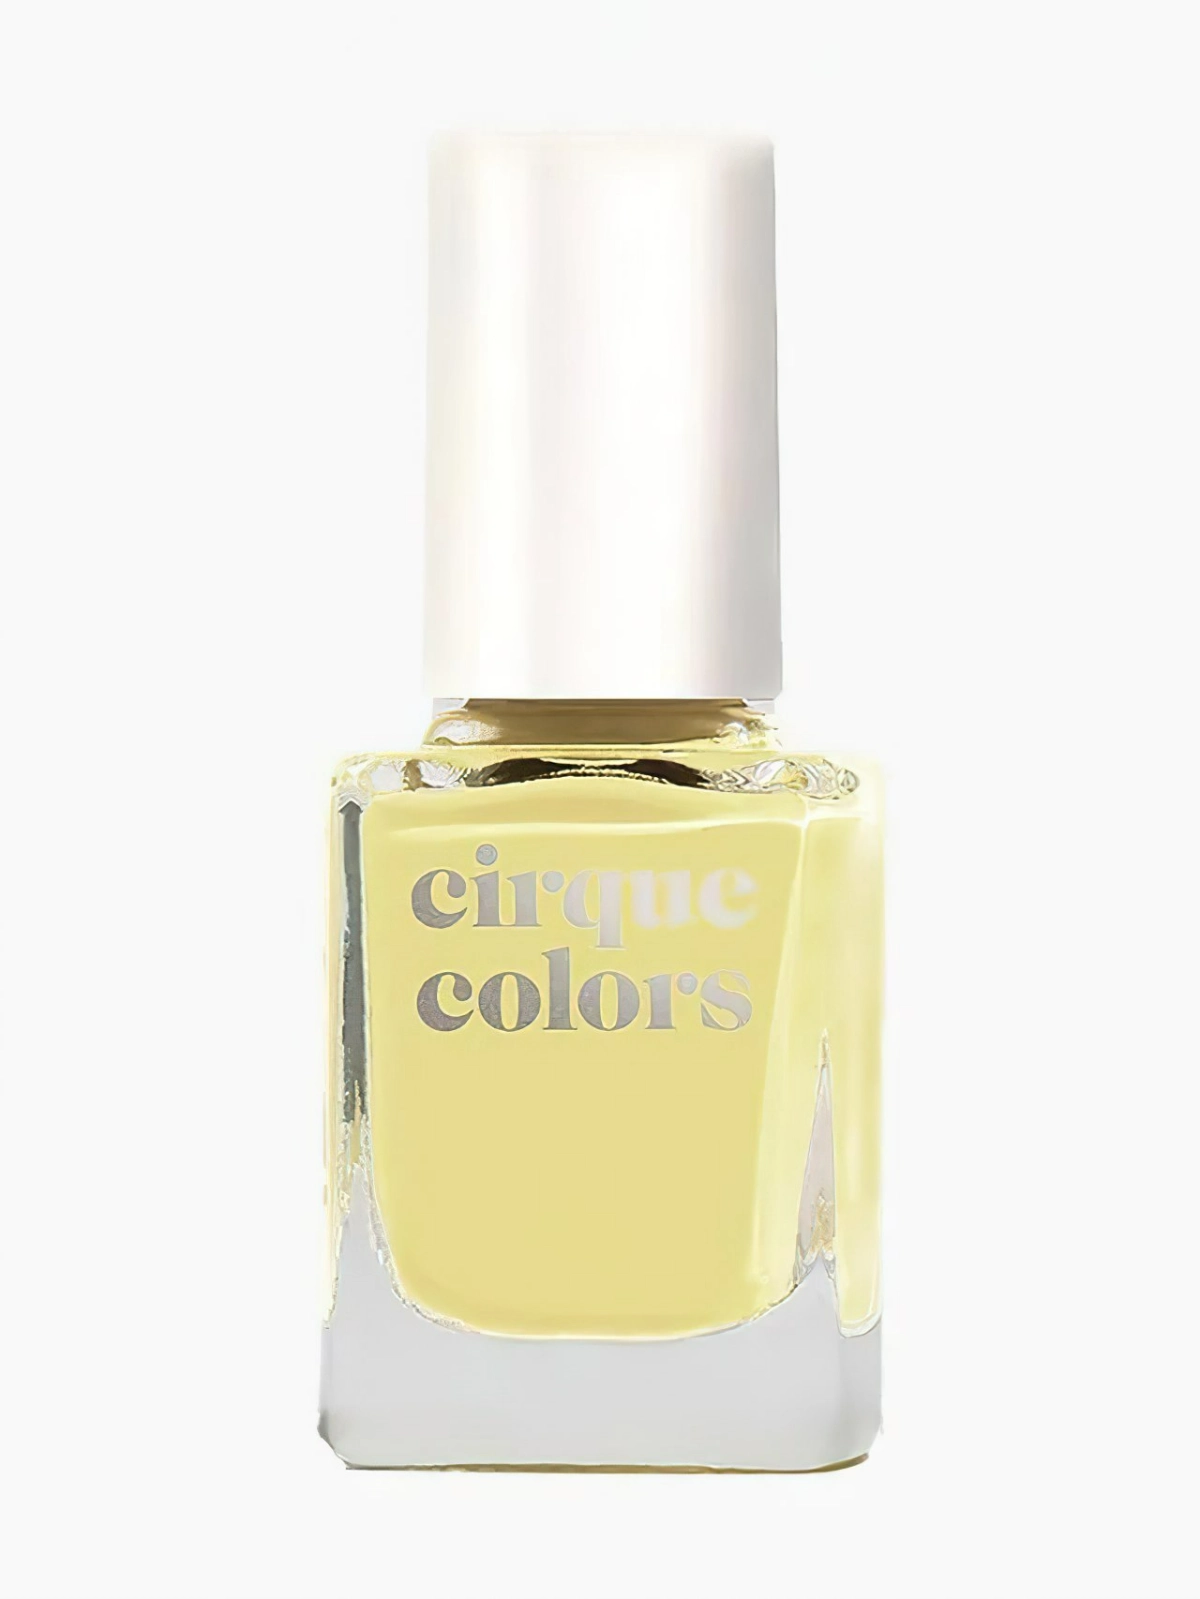 naegel 2024 trend buttergelb cirque colors nail polish in buttercup